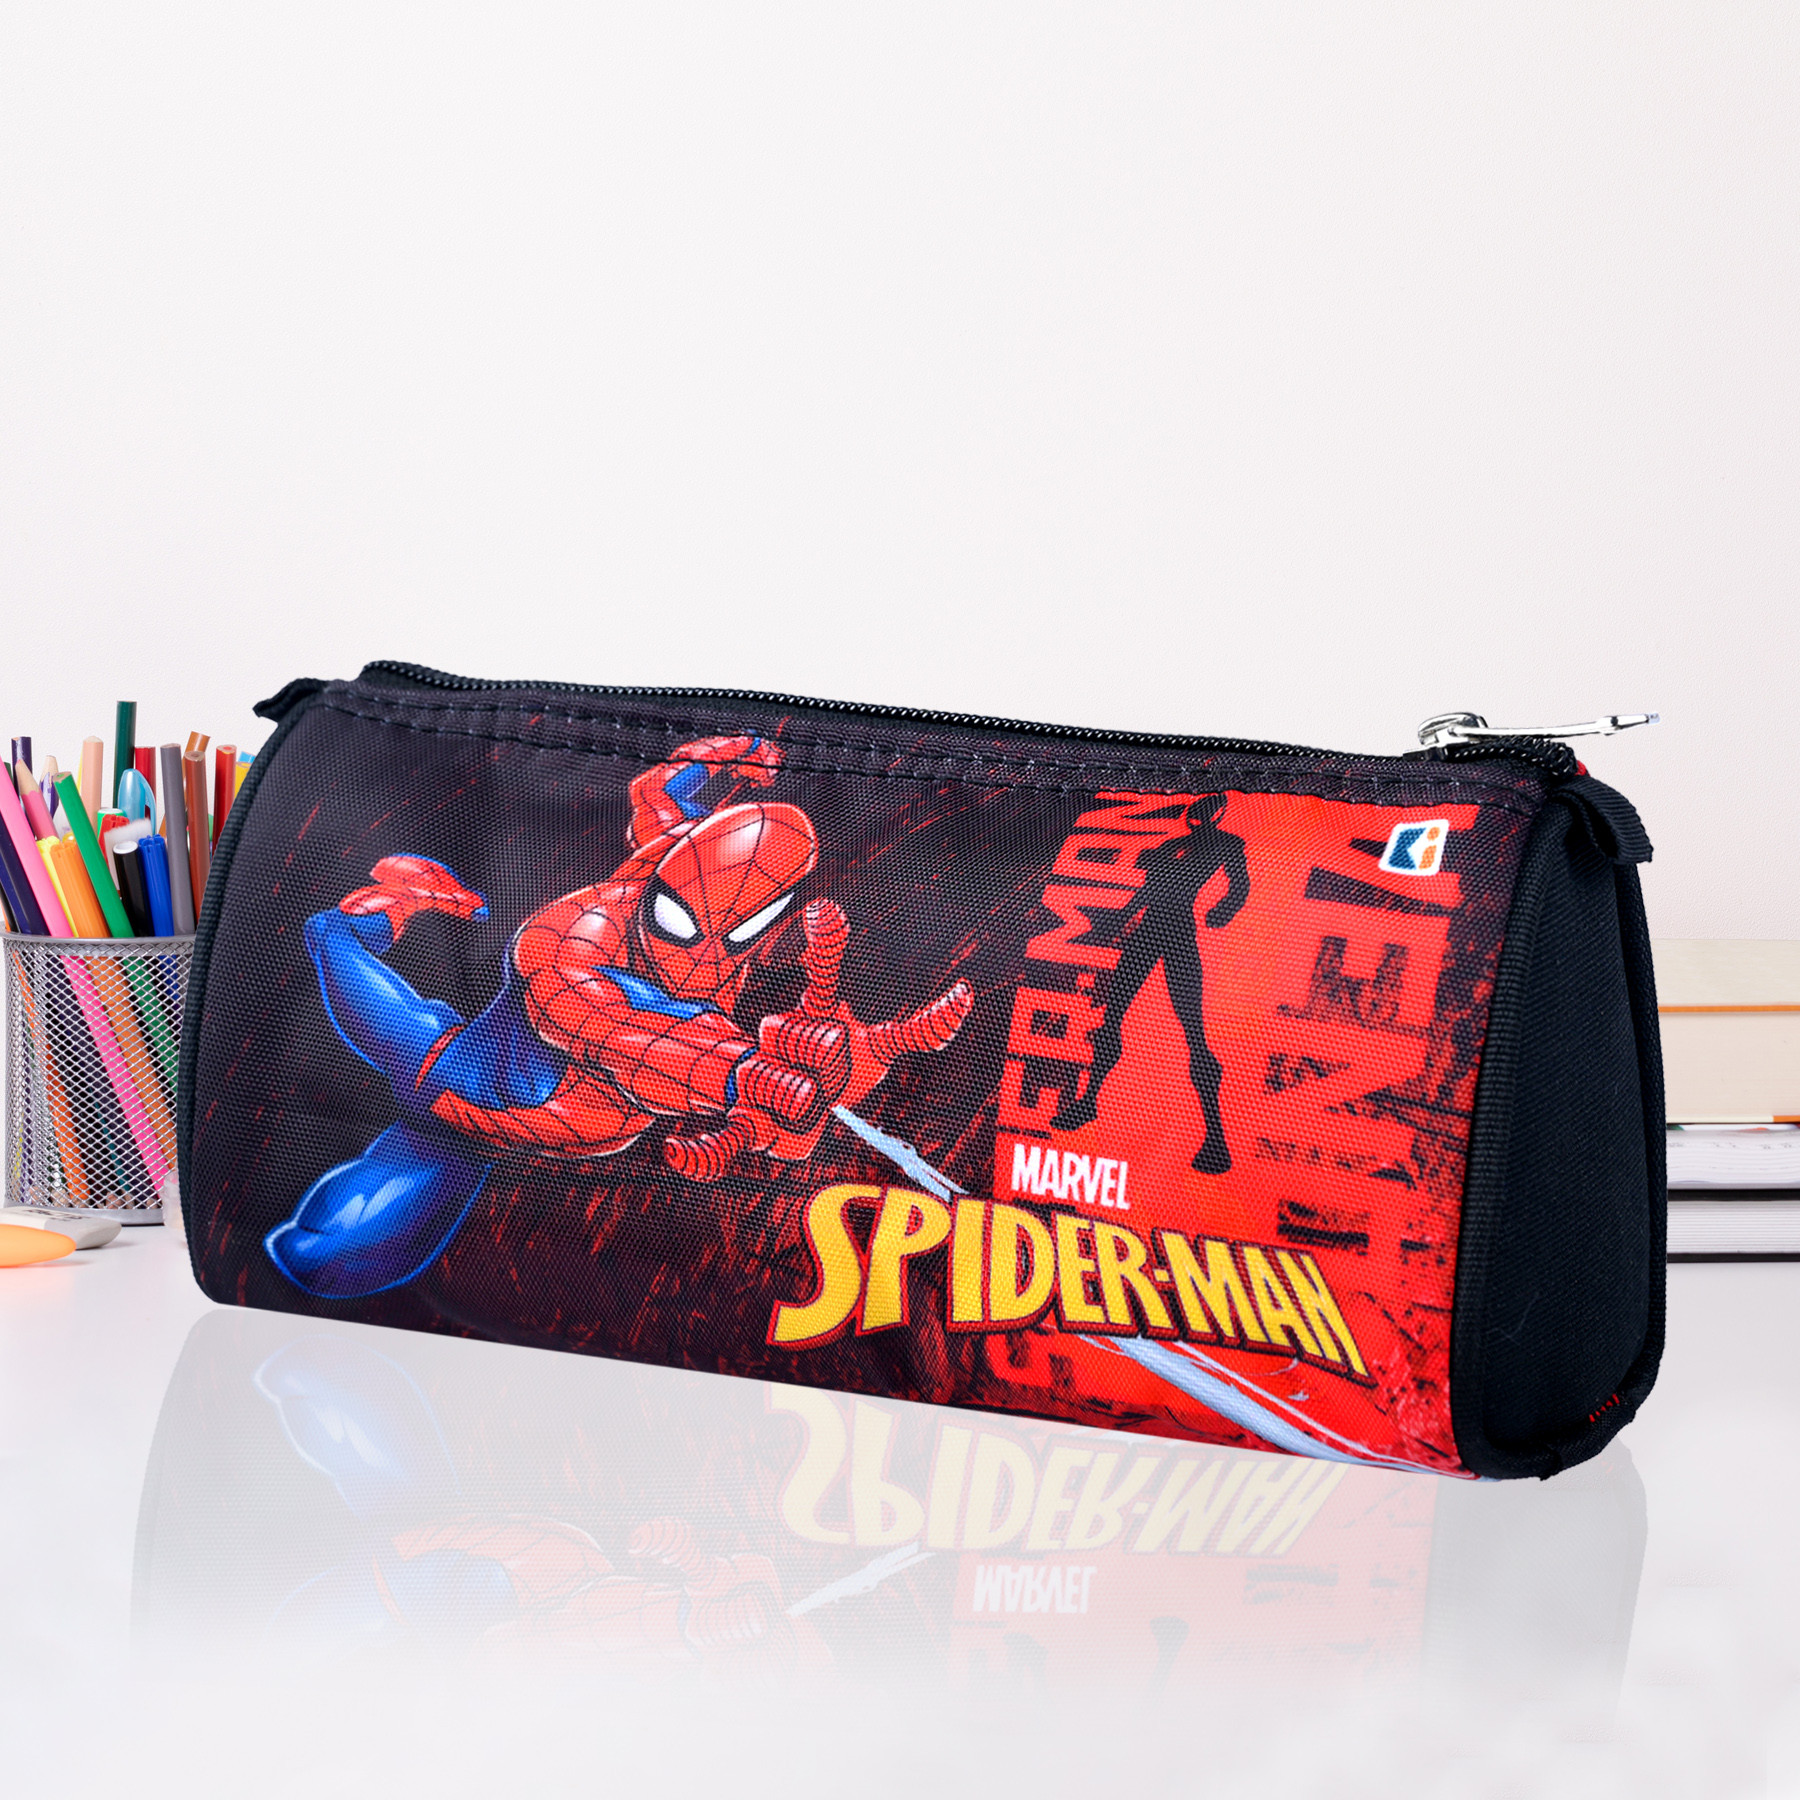 Kuber Industries Pencil Pouch | Multi-Purpose Travel Pouch | Kids Stationary Storage Bag | Pencil Utility School Pouches | Geometry Box | Marvel Spider-Man | Large | Red & Black